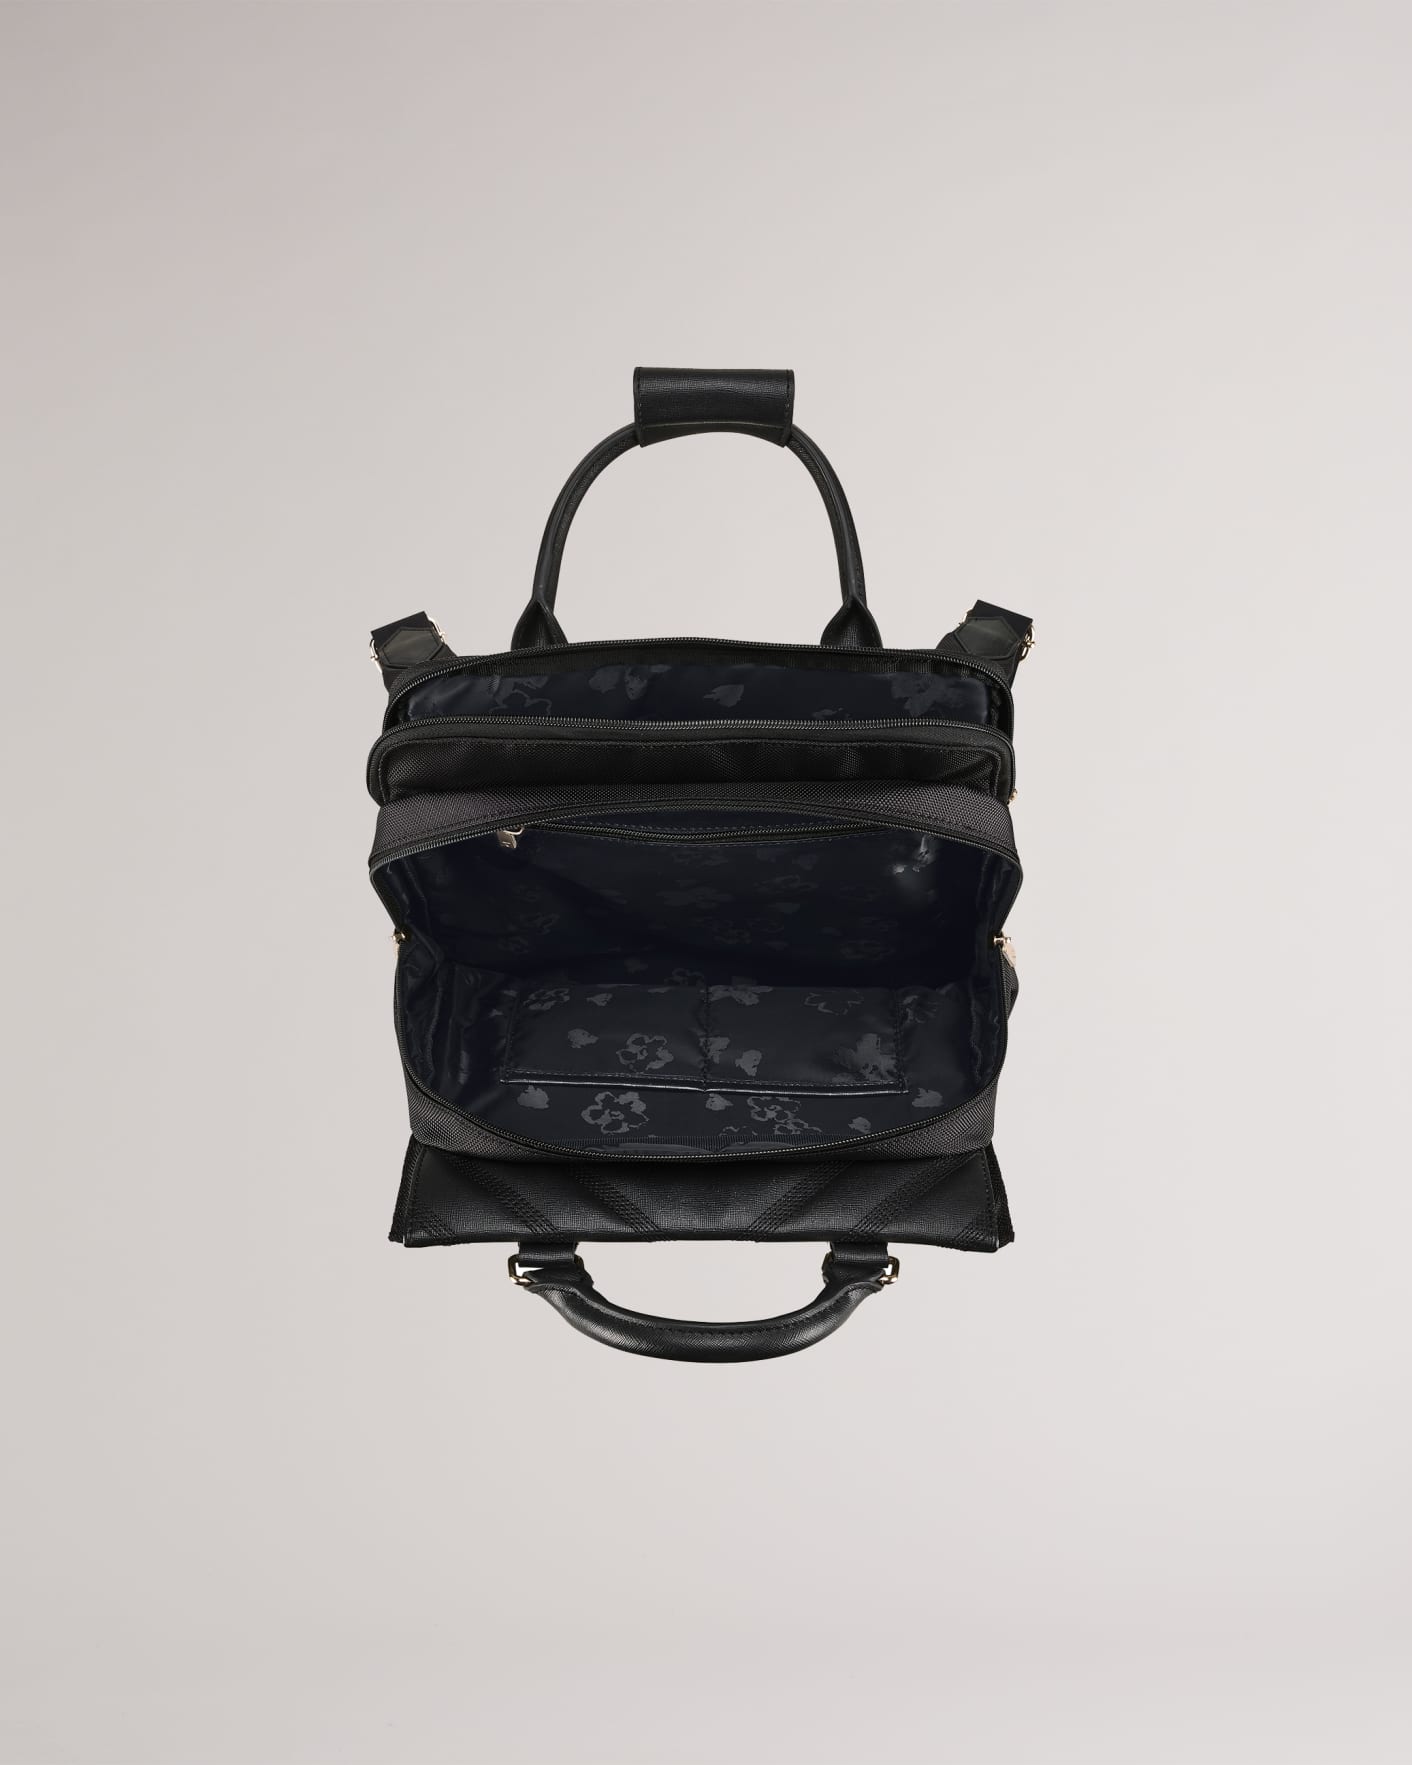 ASTRYID - BLACK | Suitcases & Travel Bags | Ted Baker UK